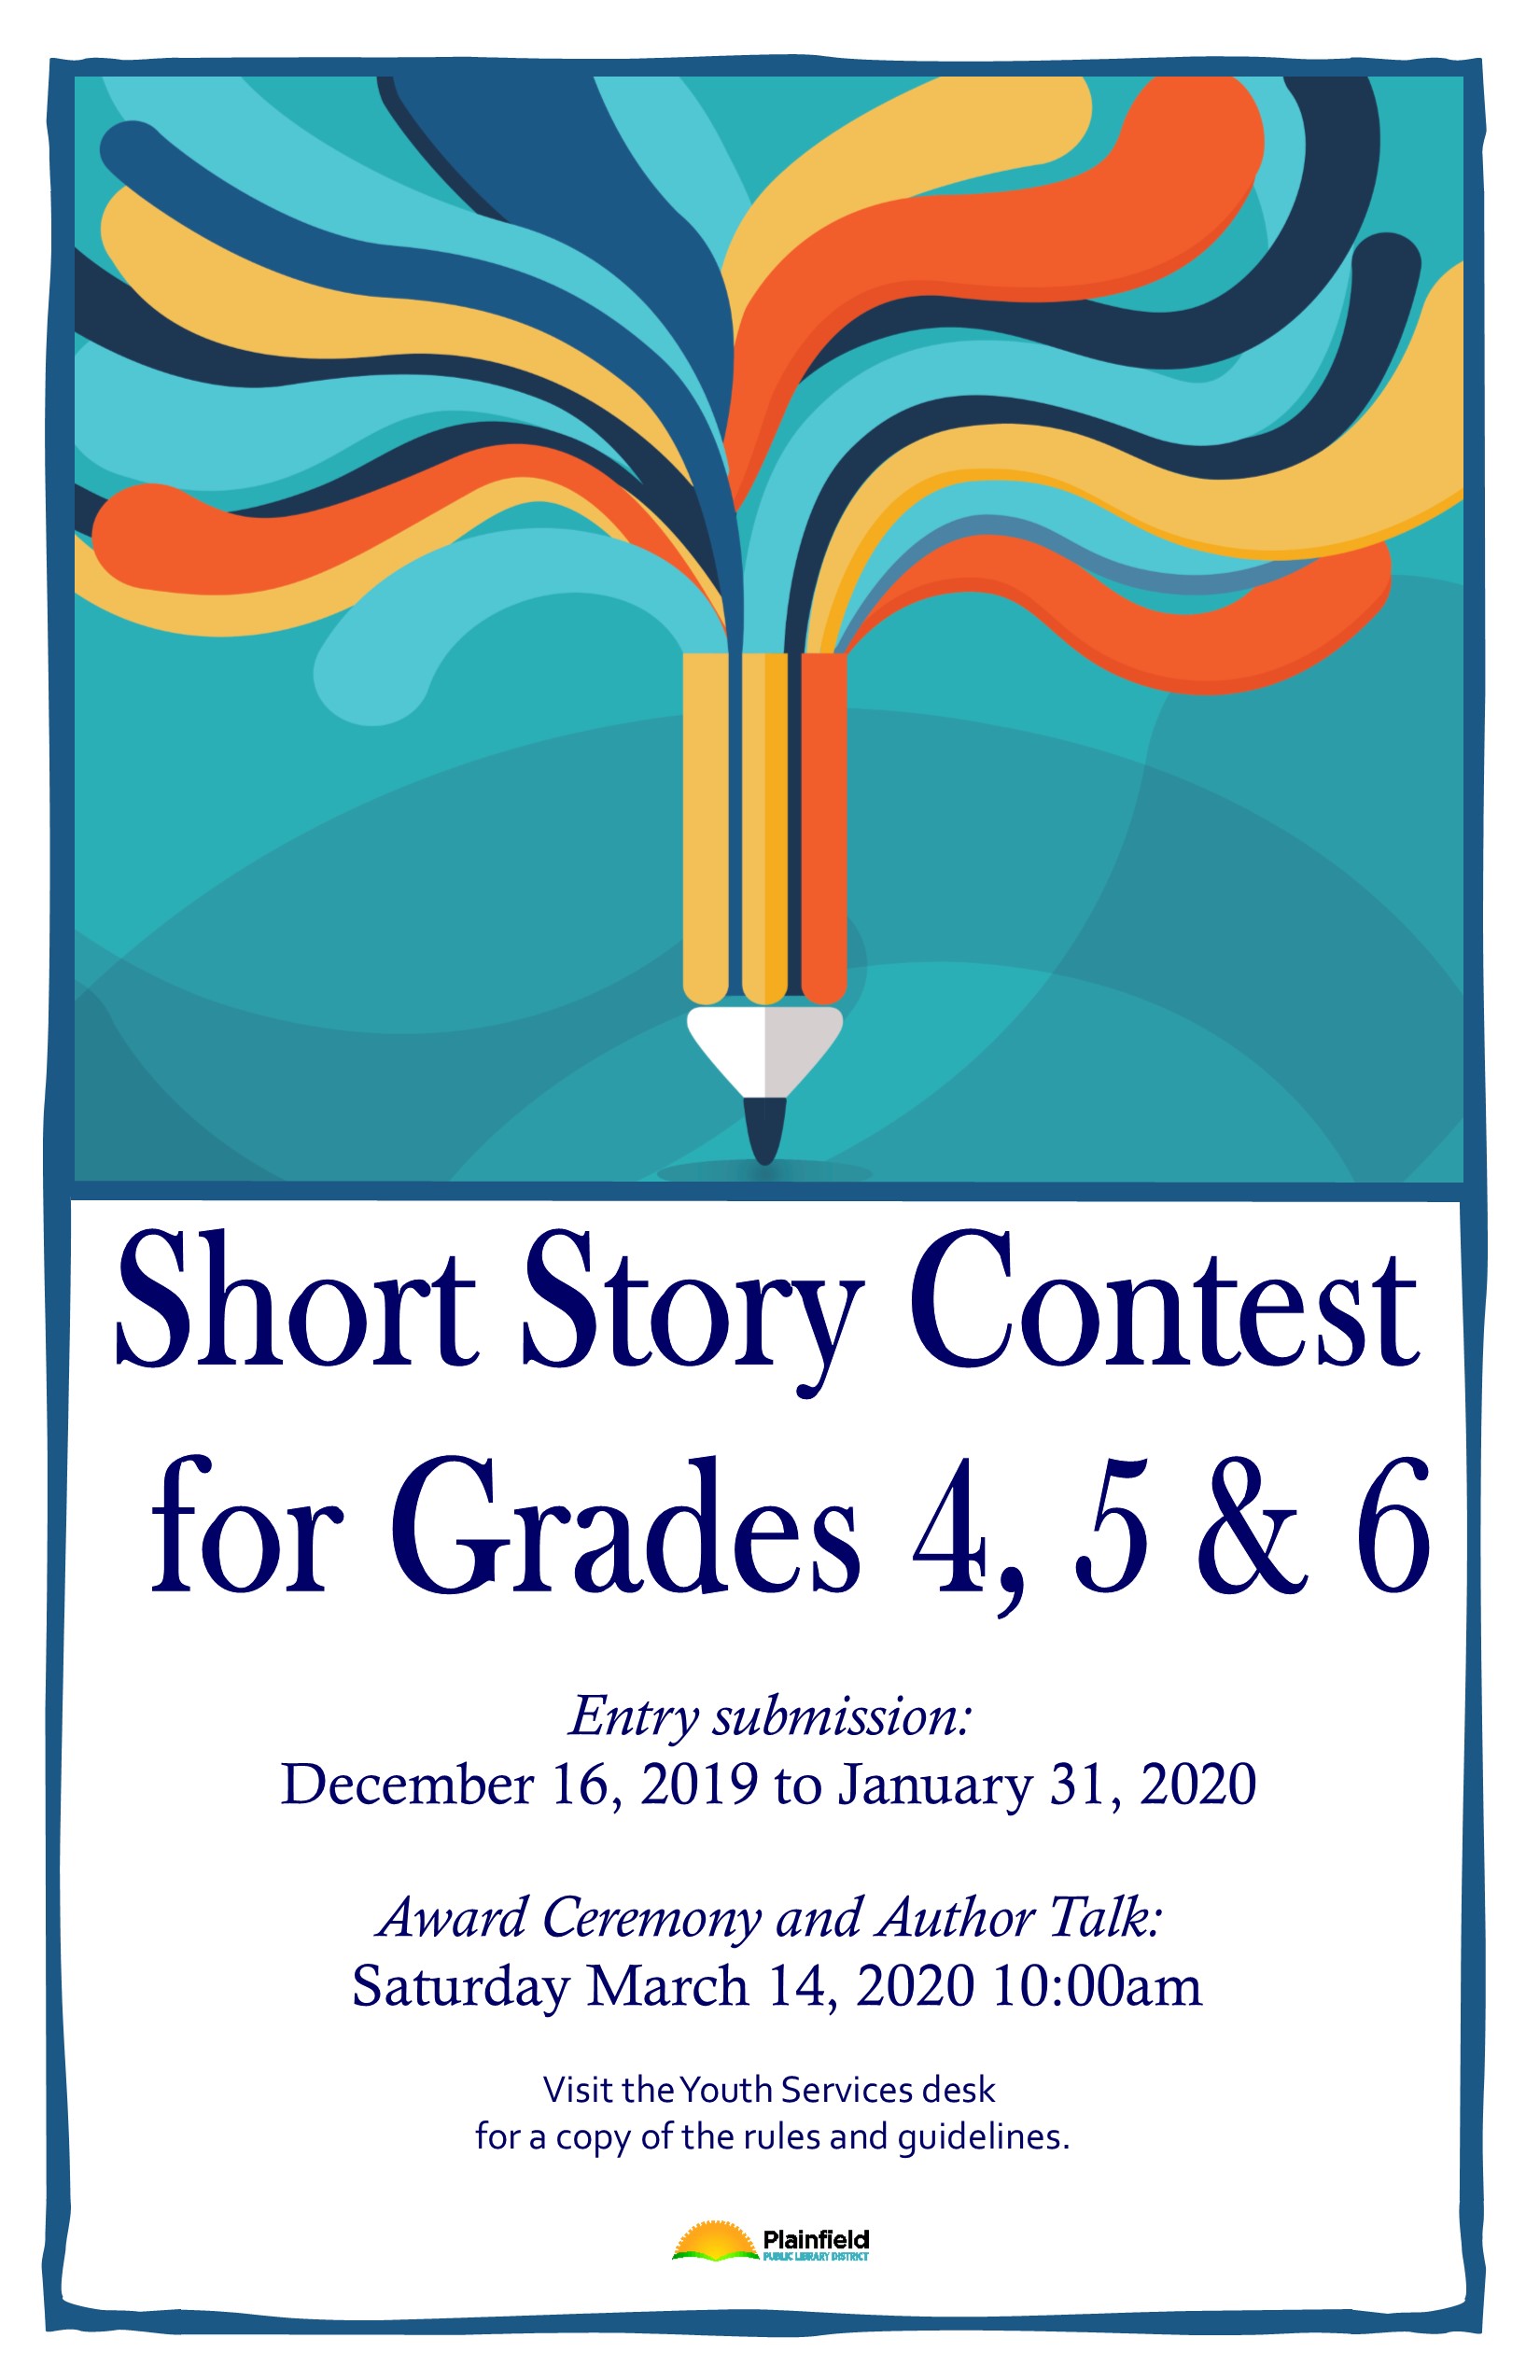 Contest entry dates 12/16/19 to 1/31/20 Event 3/14/20 